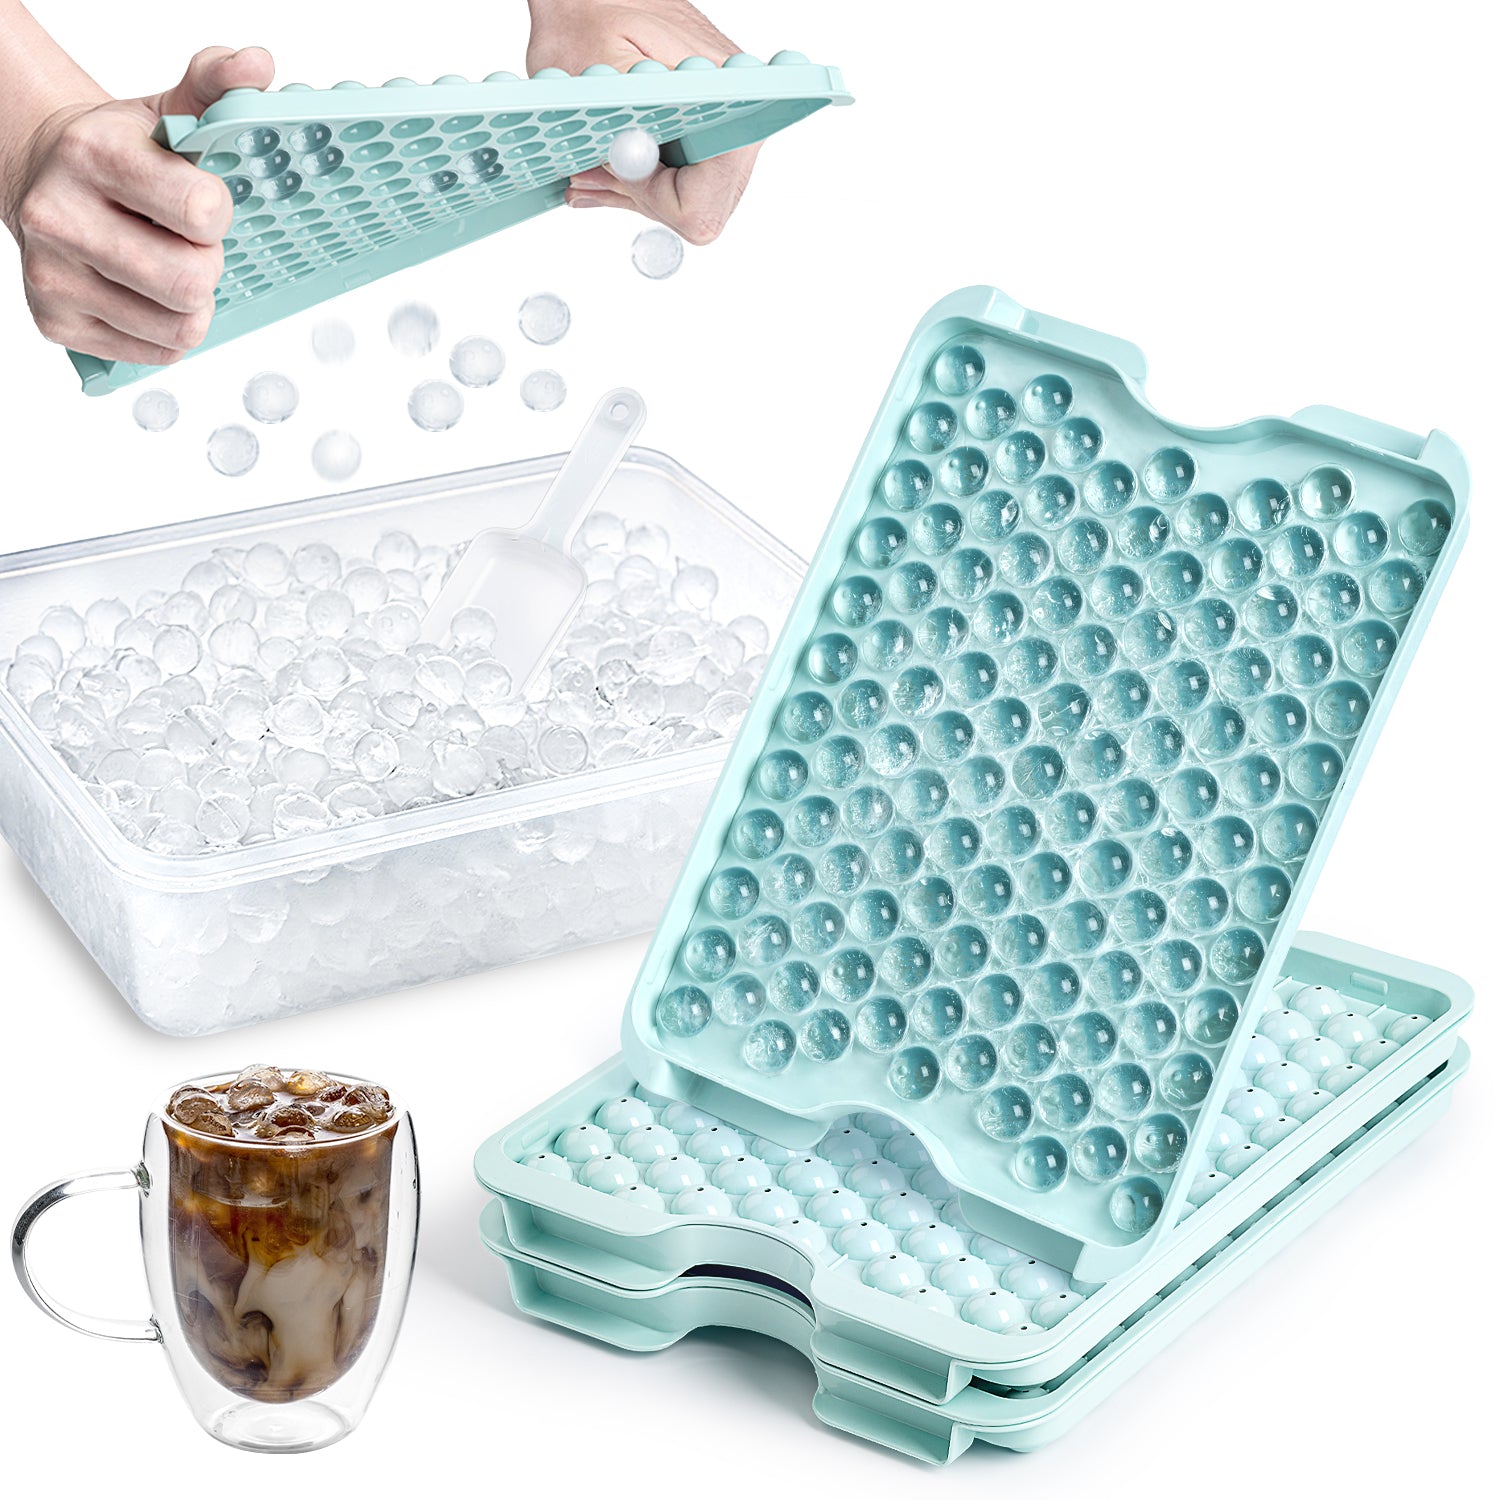 Arrow Small Ice Cube Trays for Freezer, 3 Pack - 60 Mini Cubes Per